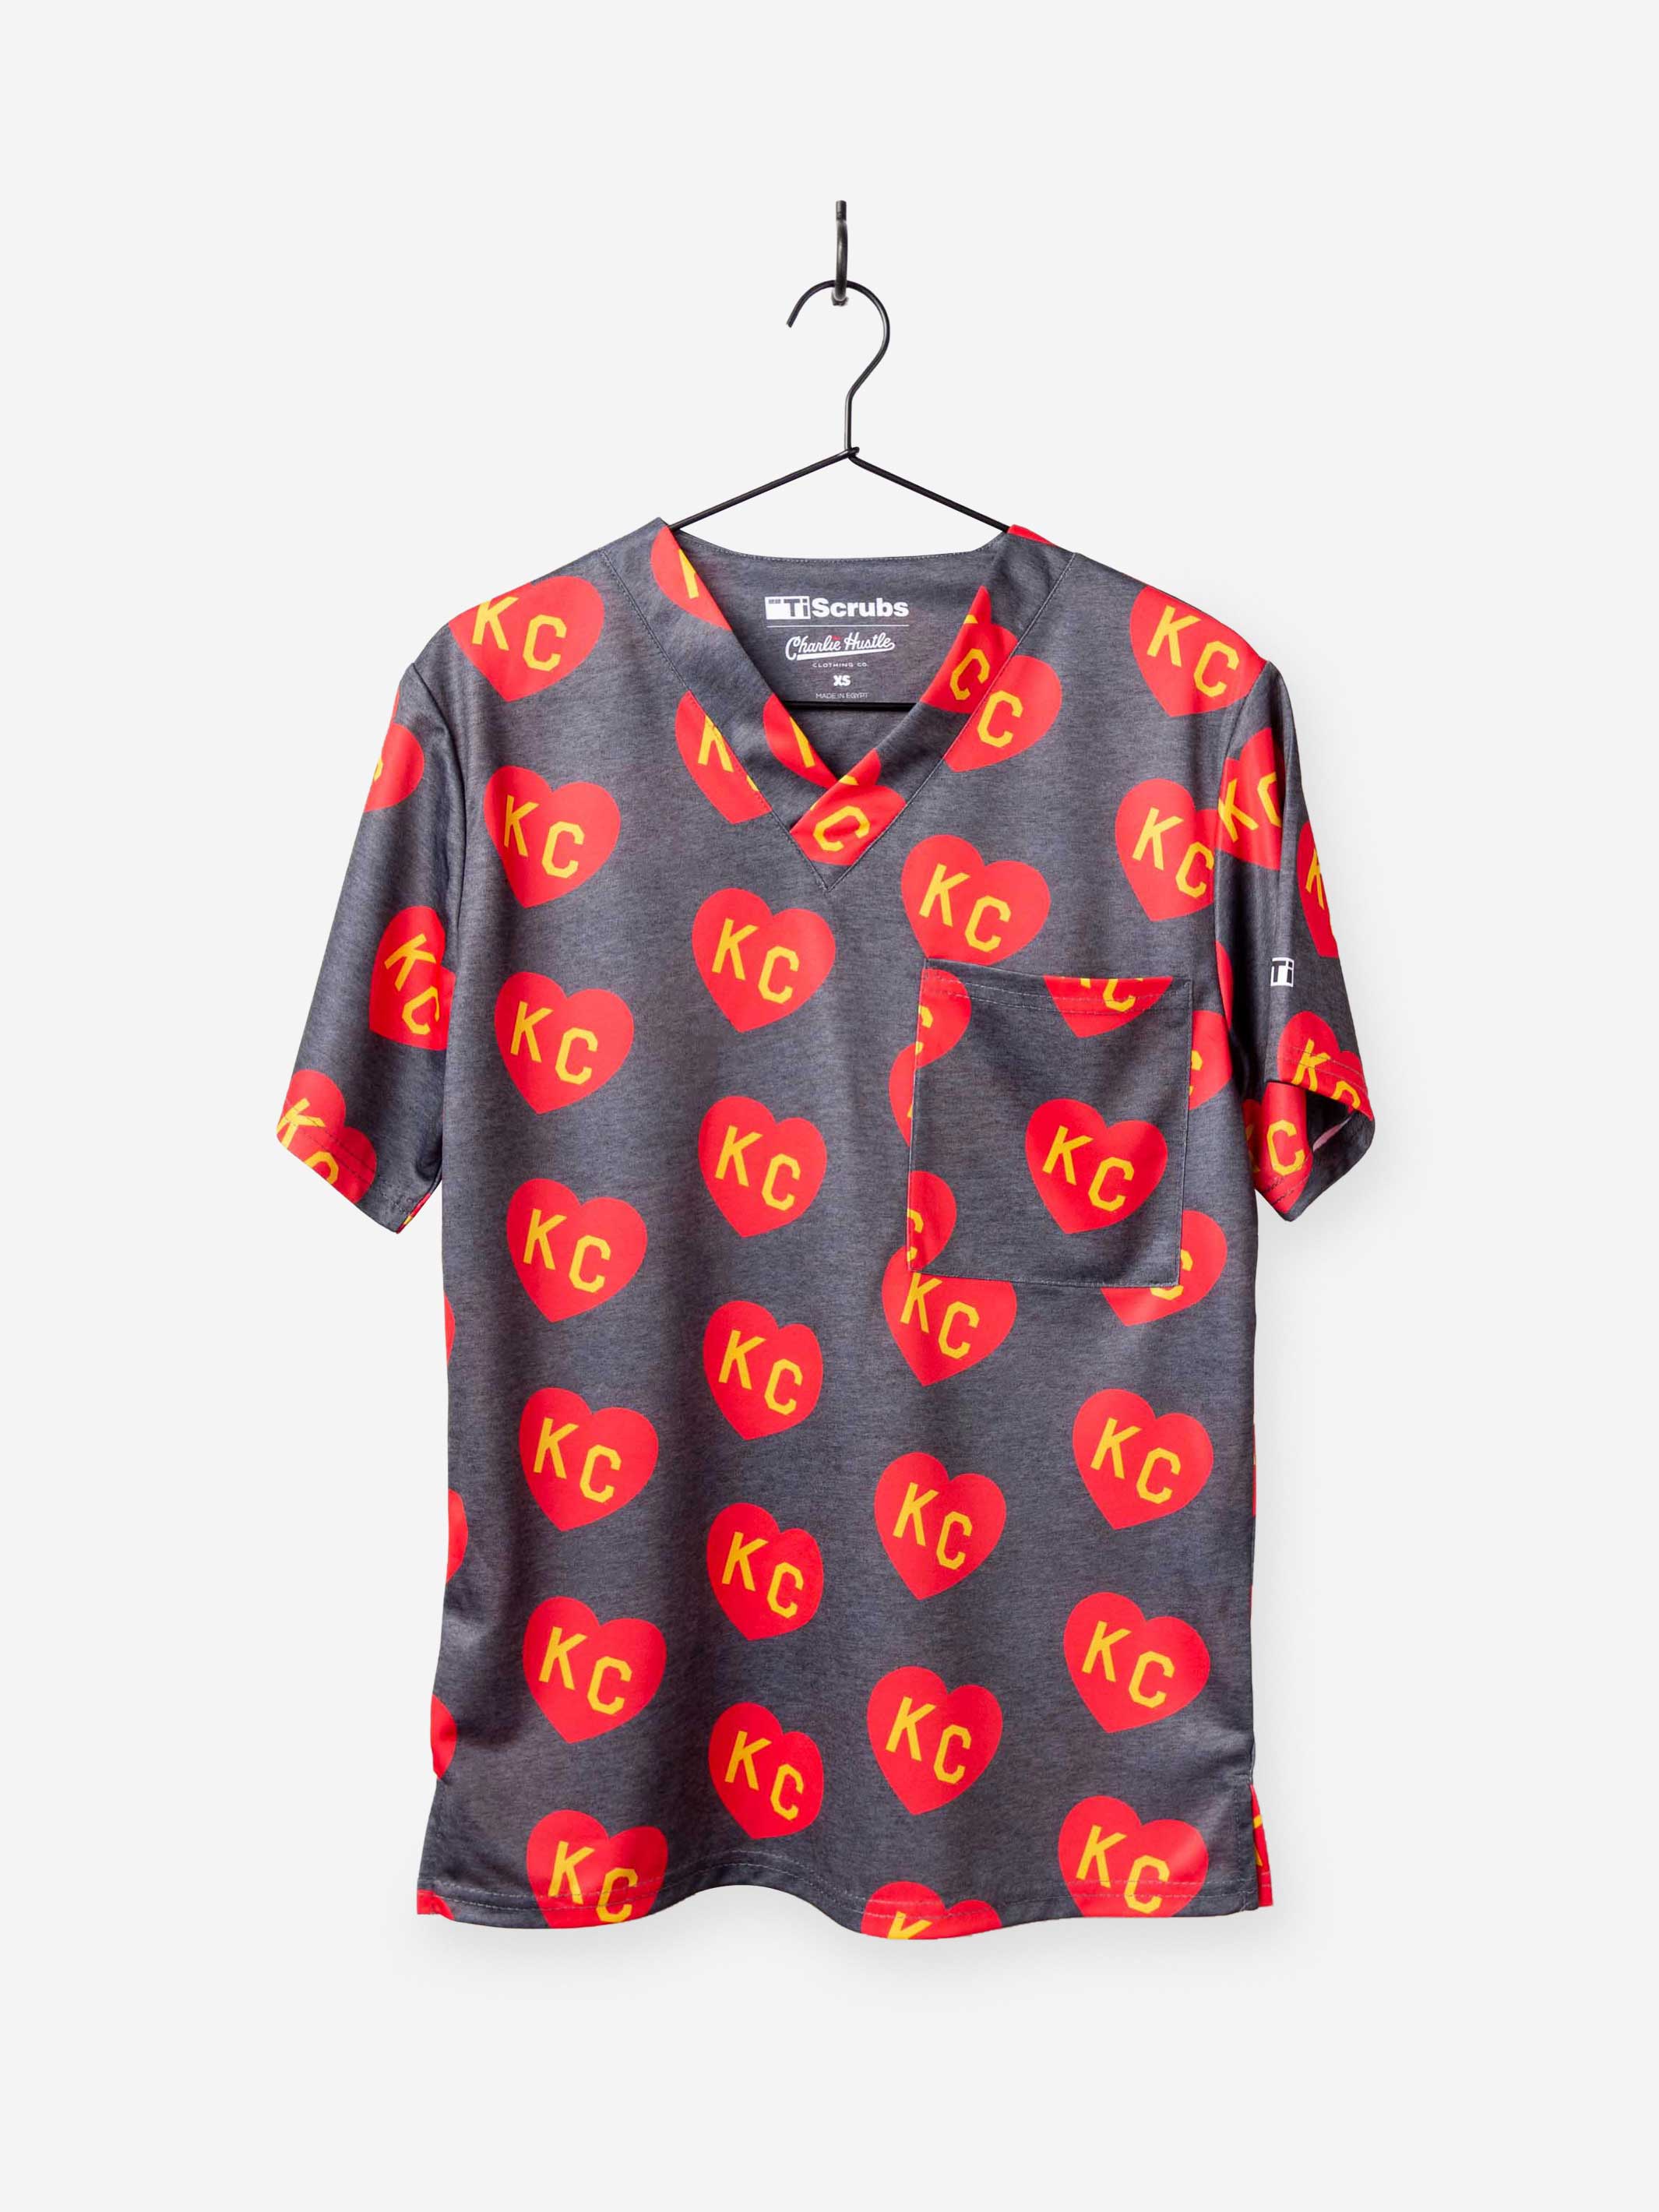 Men's Charlie Hustle Print Scrub Top with KC Heart All Over Pattern in Red and Gold and heather gray